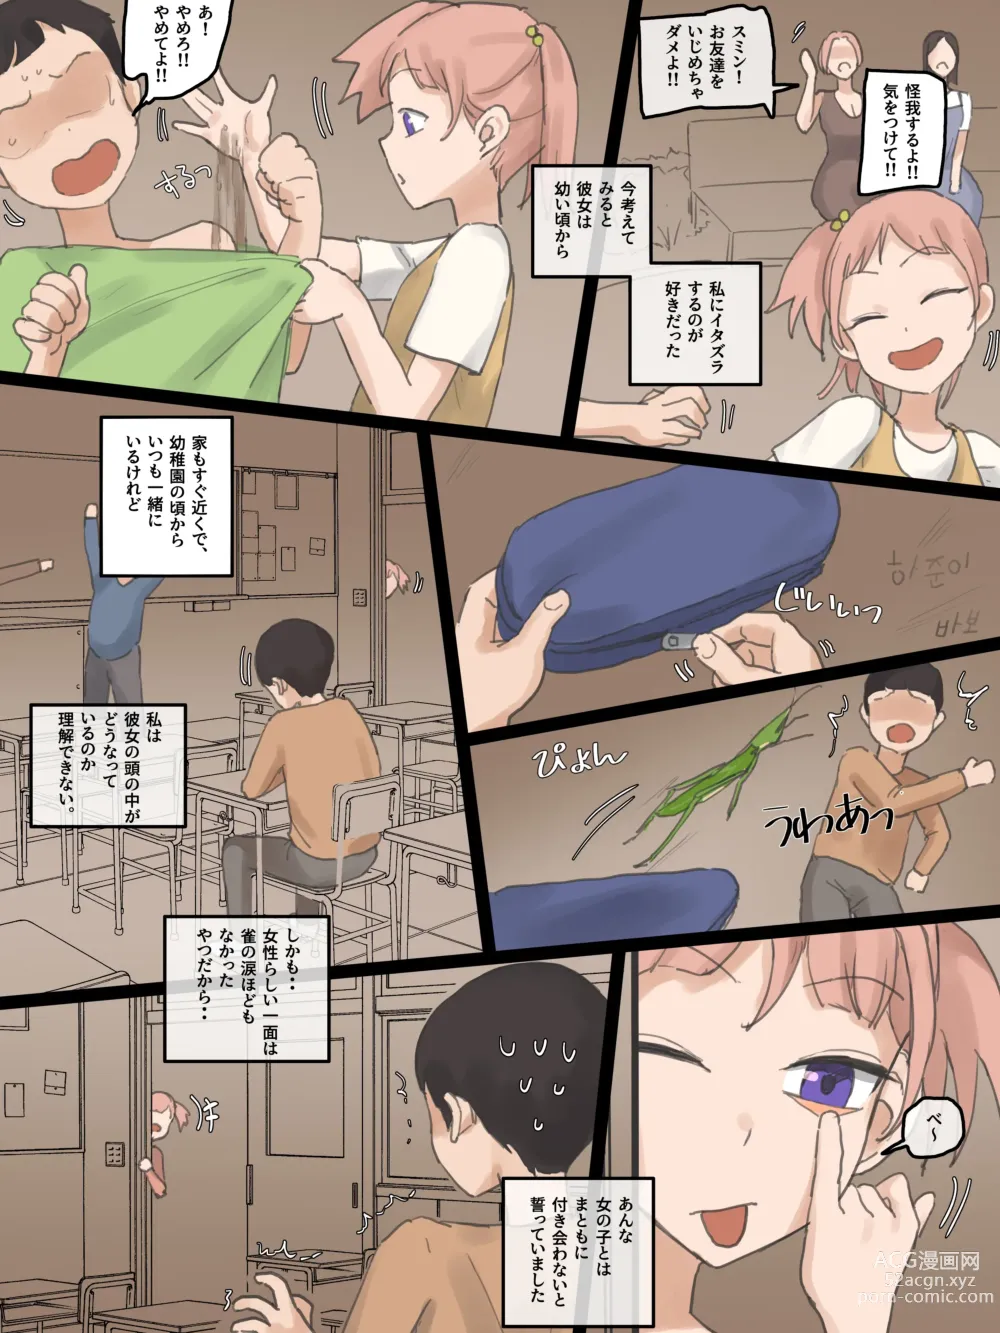 Page 6 of doujinshi NEVERTHELESS